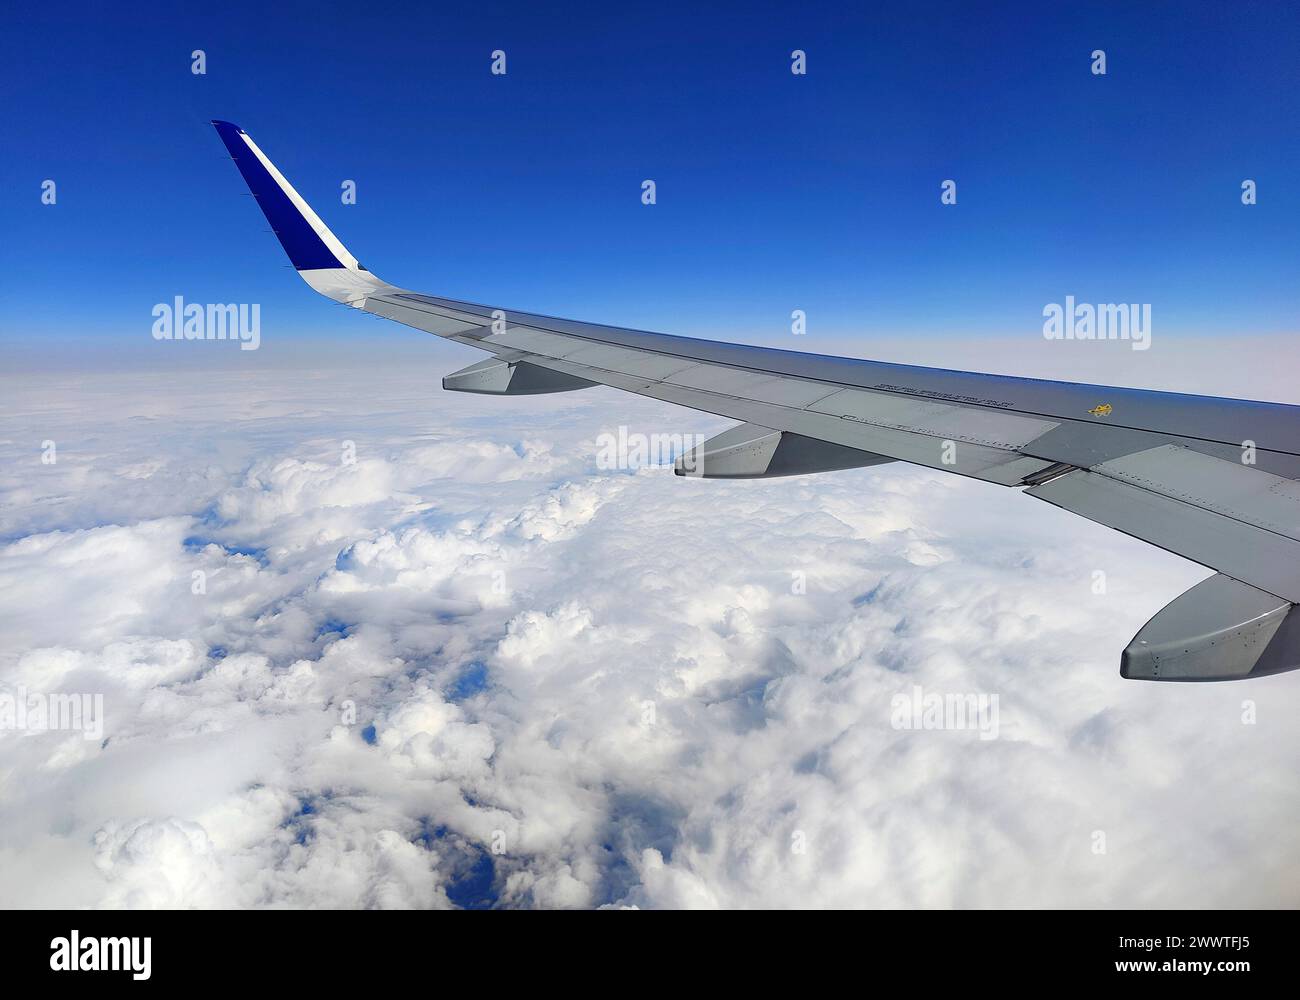 view from the aircraft over the wing to the clouds Stock Photo